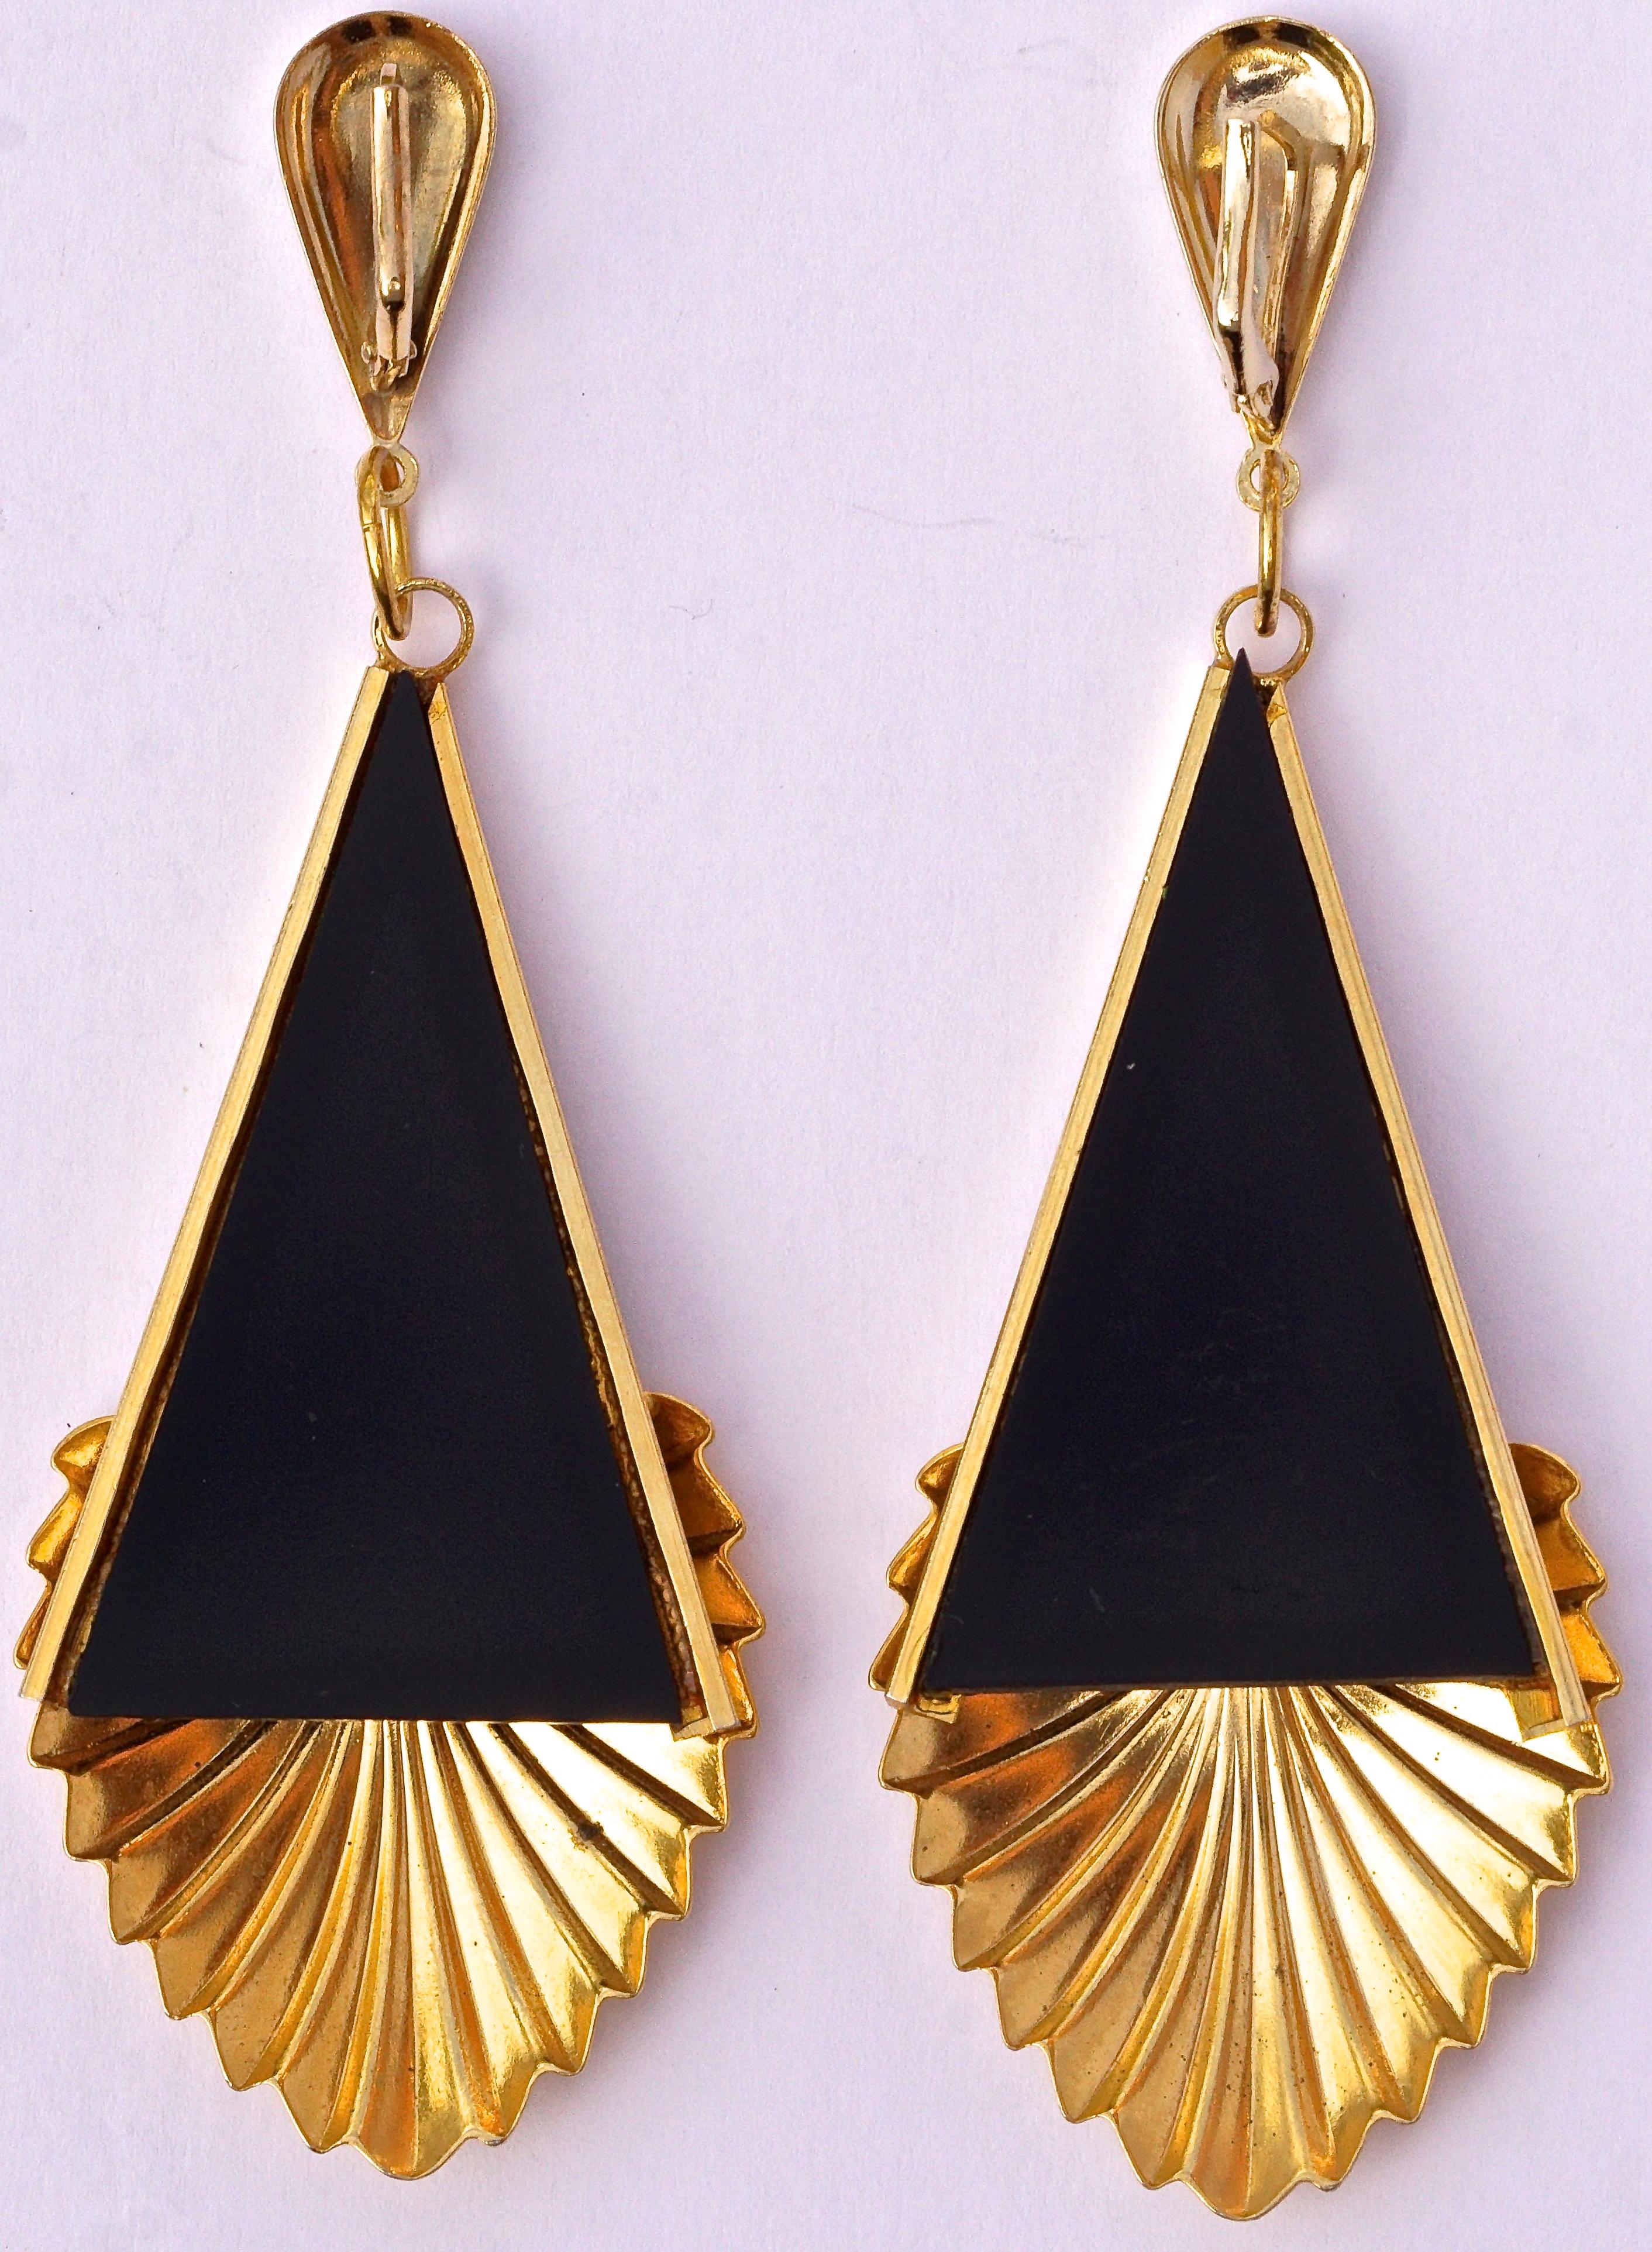 Spanish gold tone and black plastic drop earrings for pierced ears, featuring a lovely ridged shell design and faux damascene top. They are large, measuring length 9.2 cm / 3.62 inches by maximum width 3.1 cm / 1.22 inches.

These fashionable